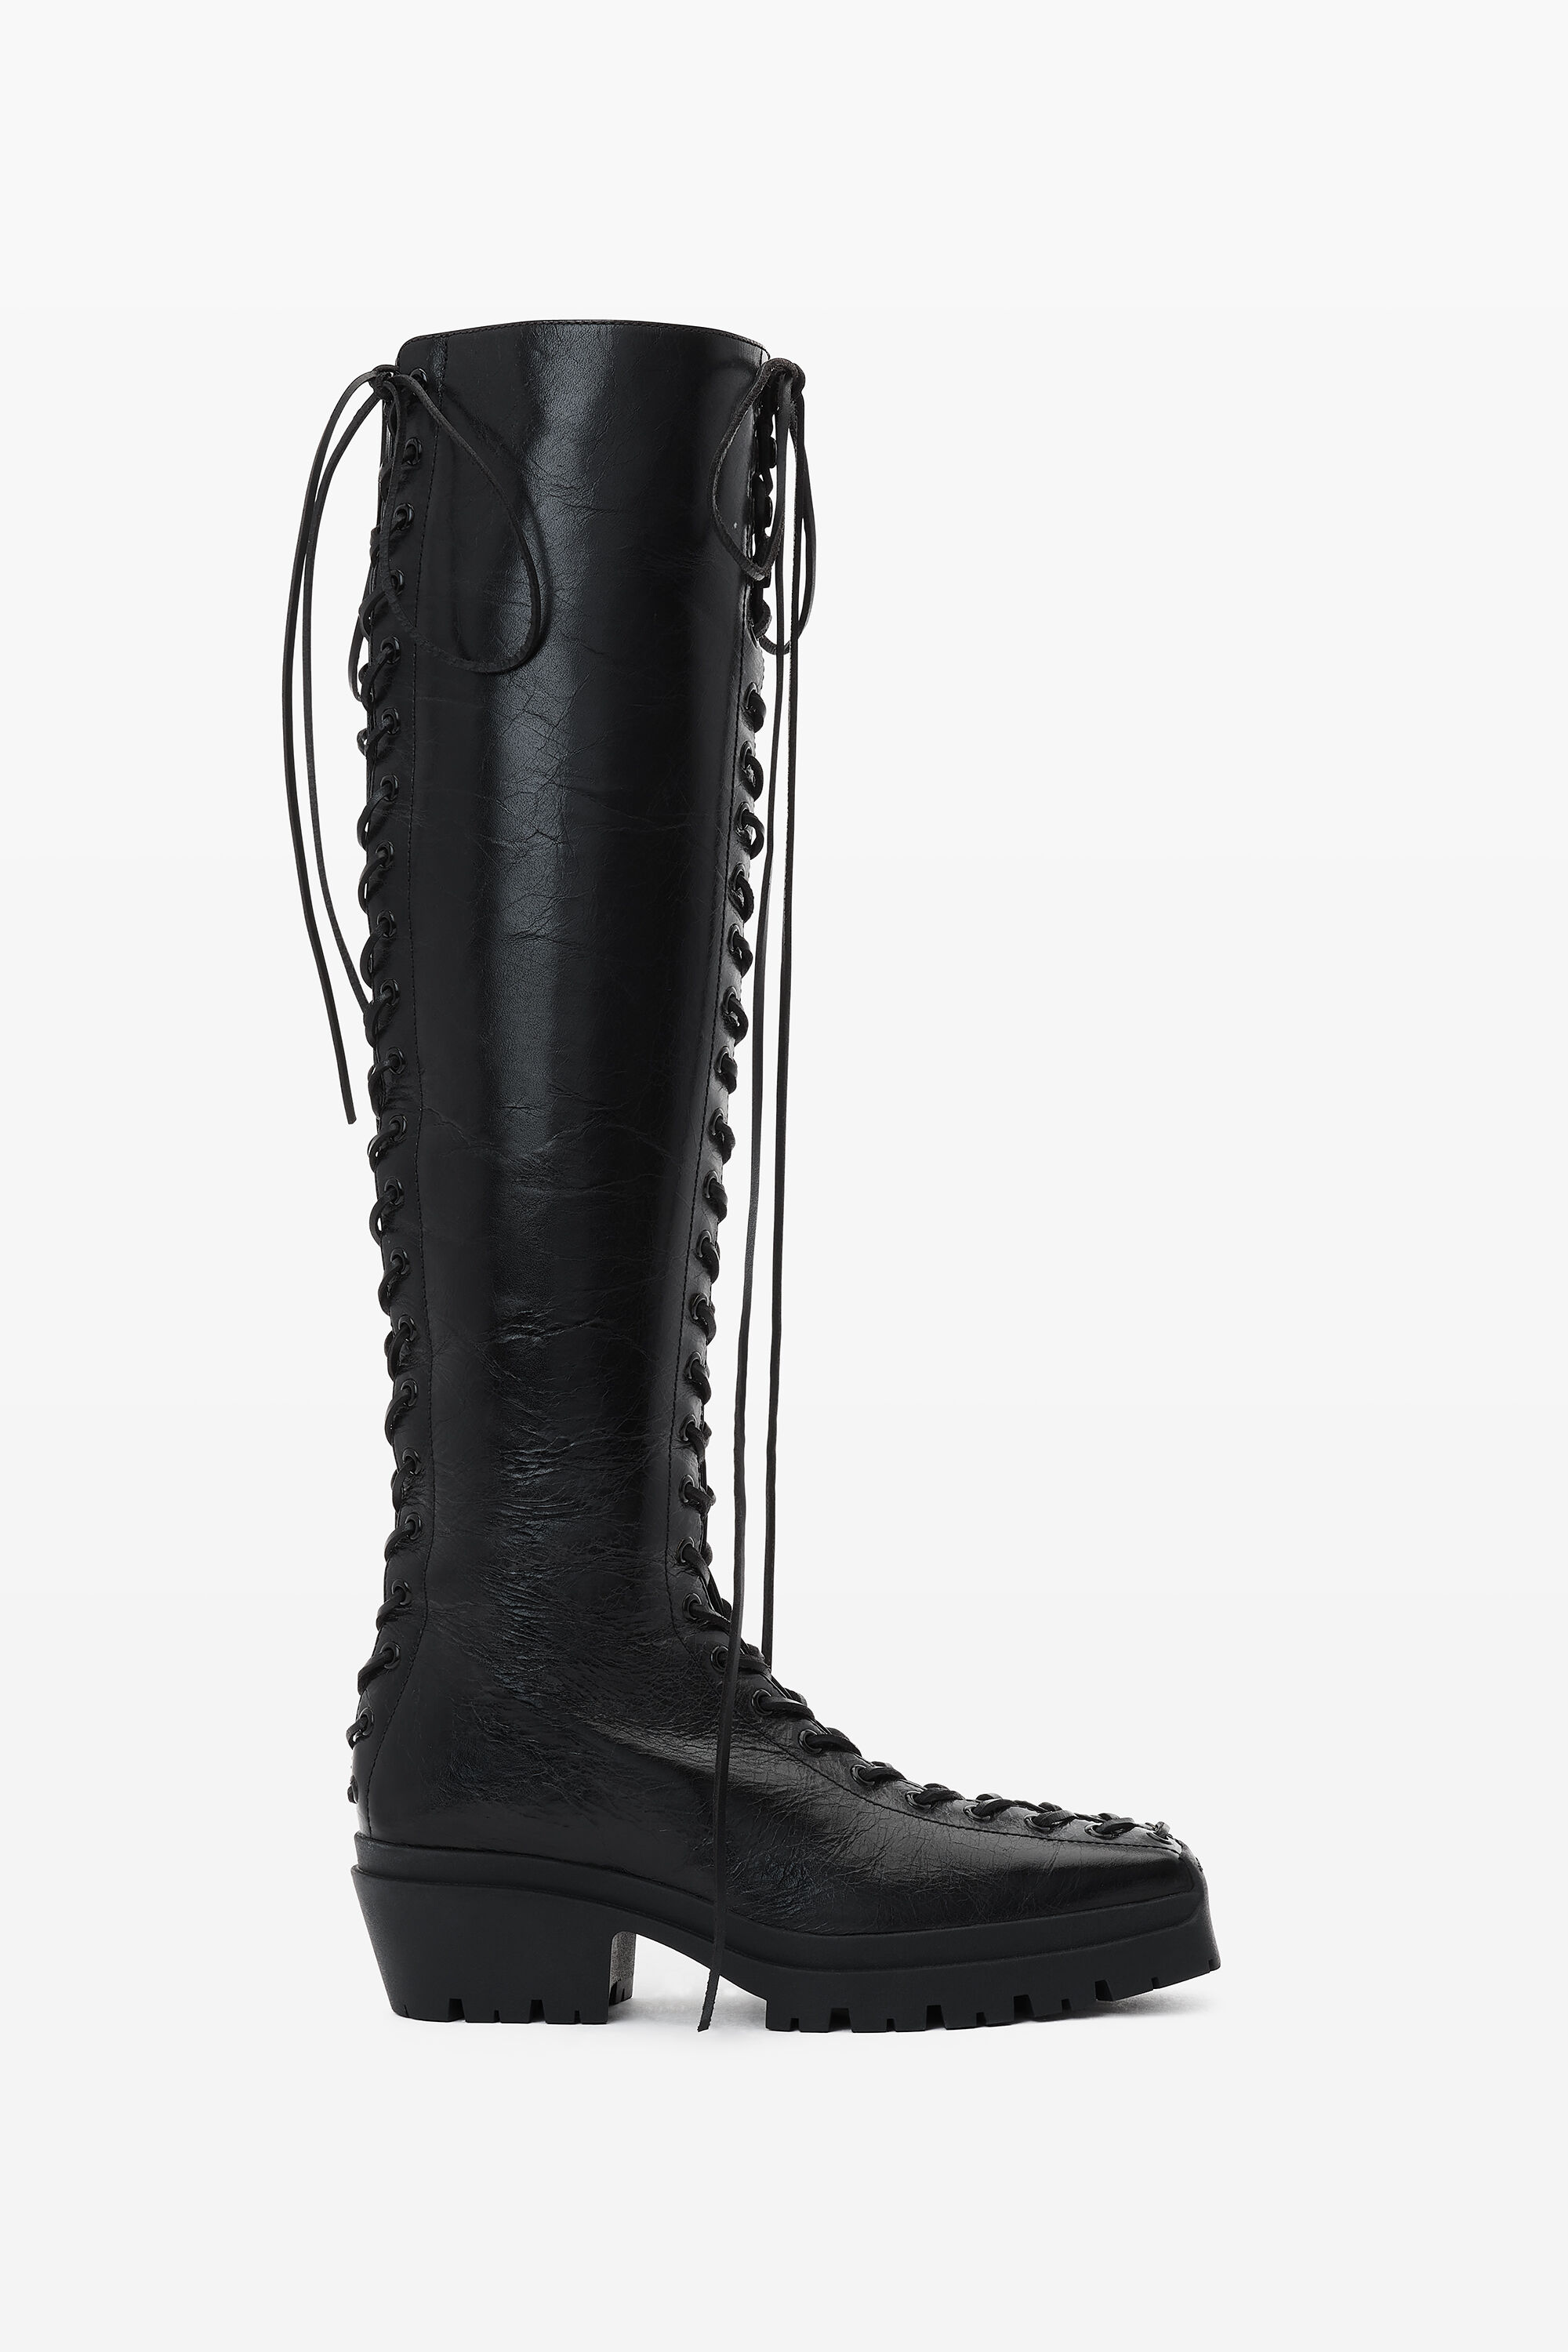 Terrain Lace Up Knee High Boot in BLACK | upper: 100% calf leather 